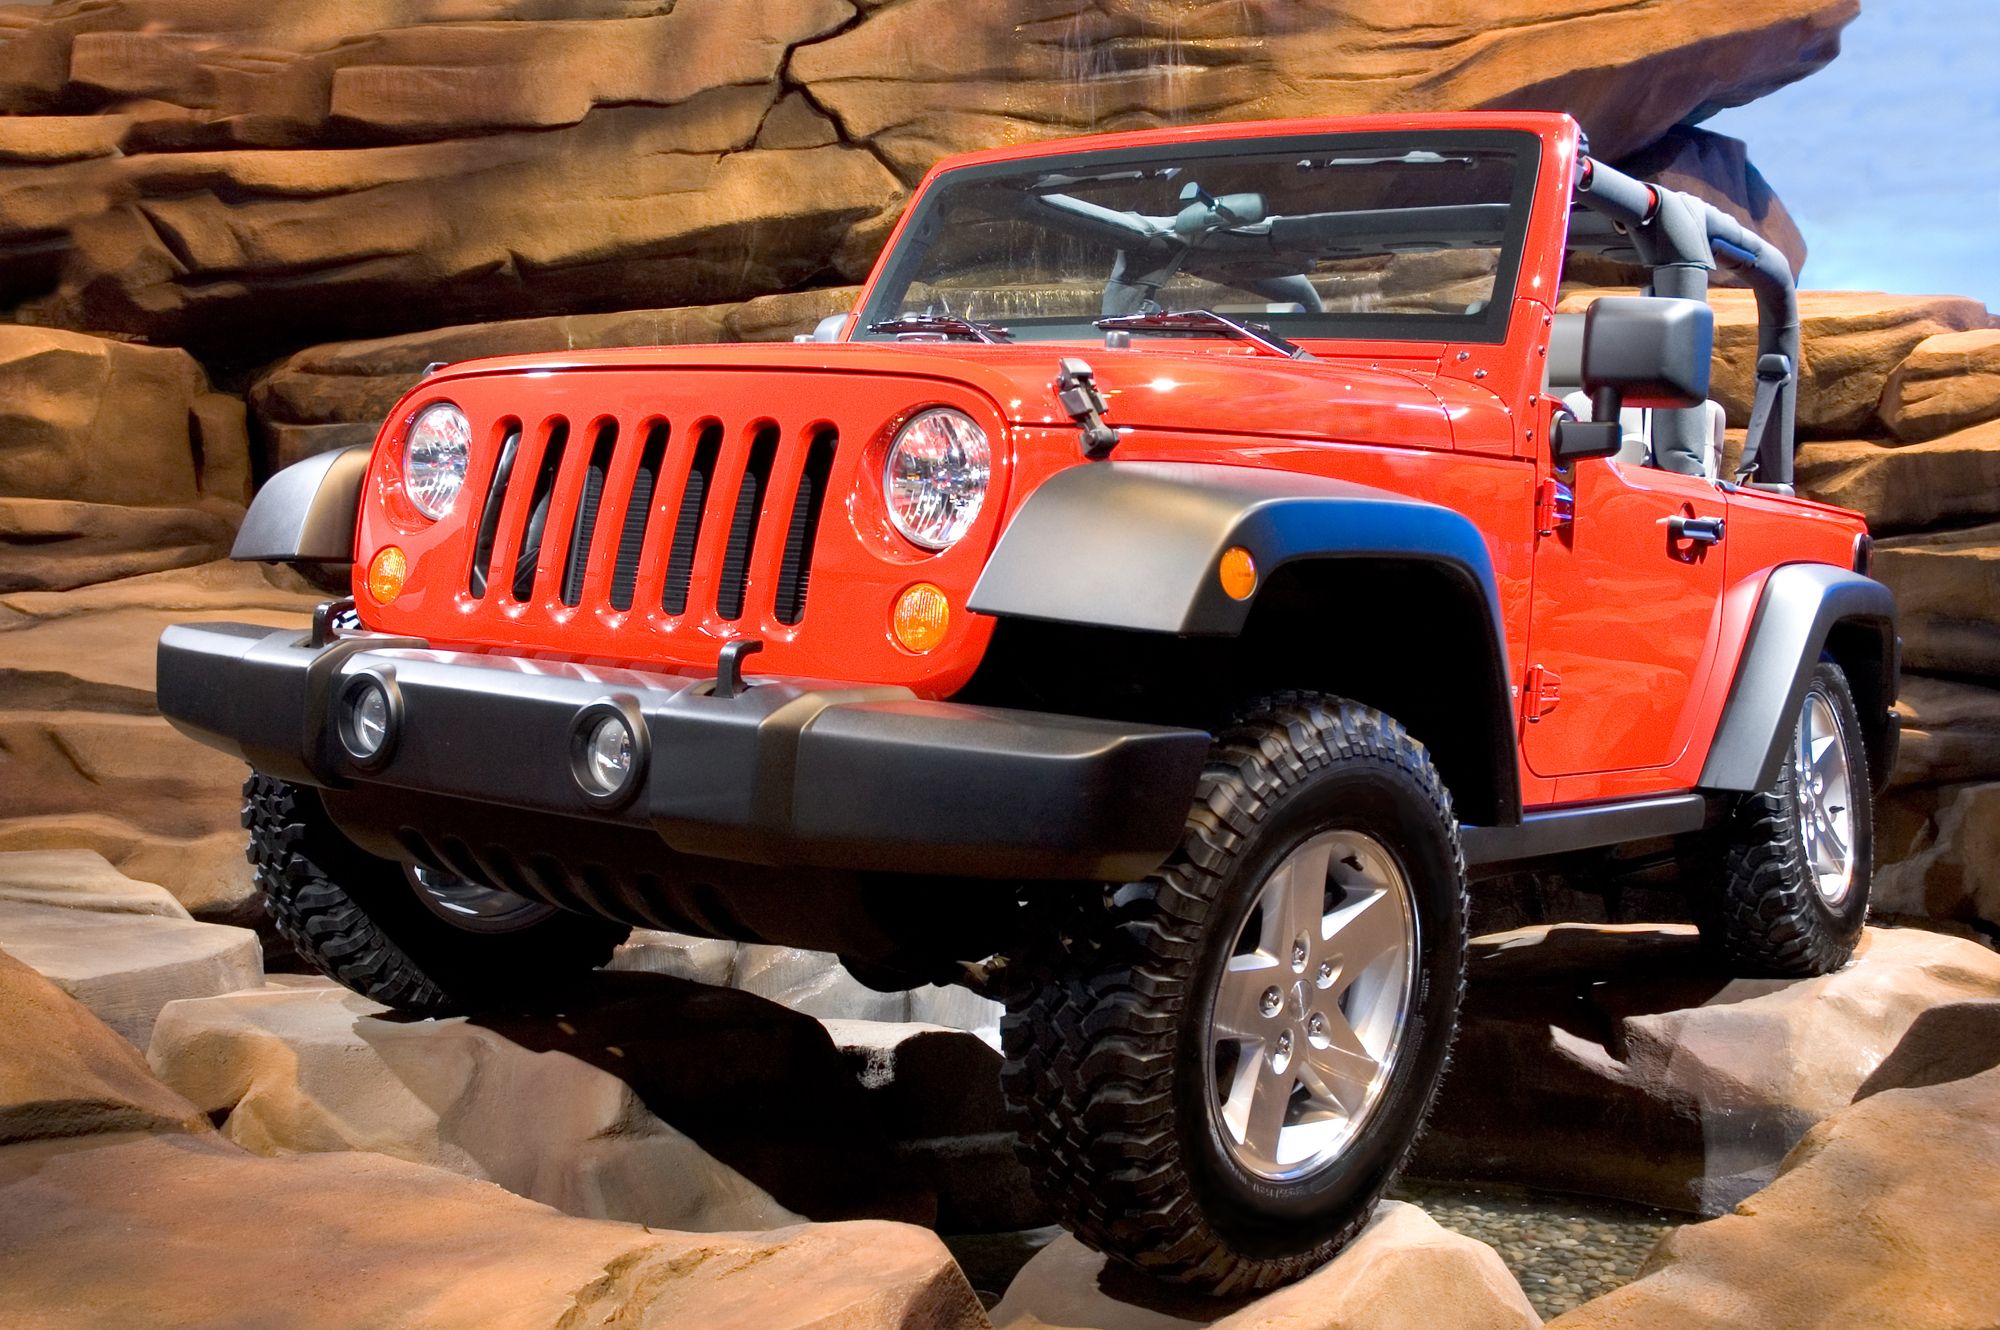 Jeep Class Action Says Wranglers Have 'Death Wobble' - Top Class Actions